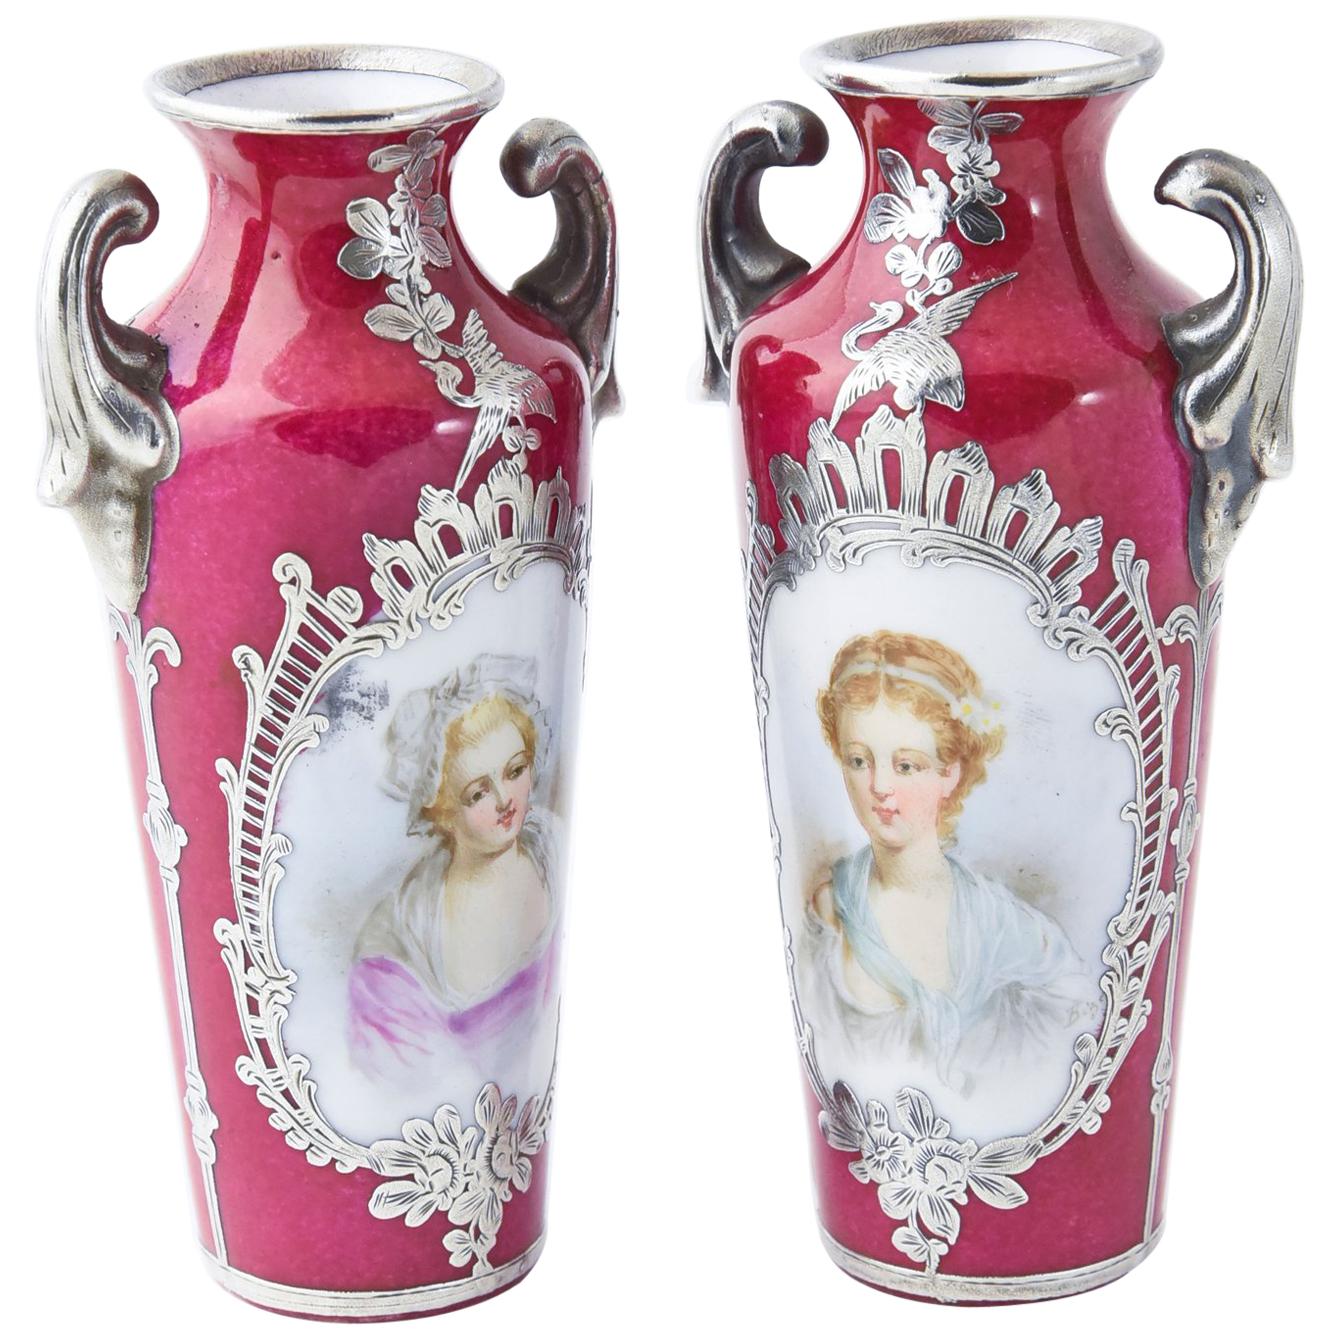 Pair of Pink Miniature Antique Portrait Vases with Silver Overlay Decoration